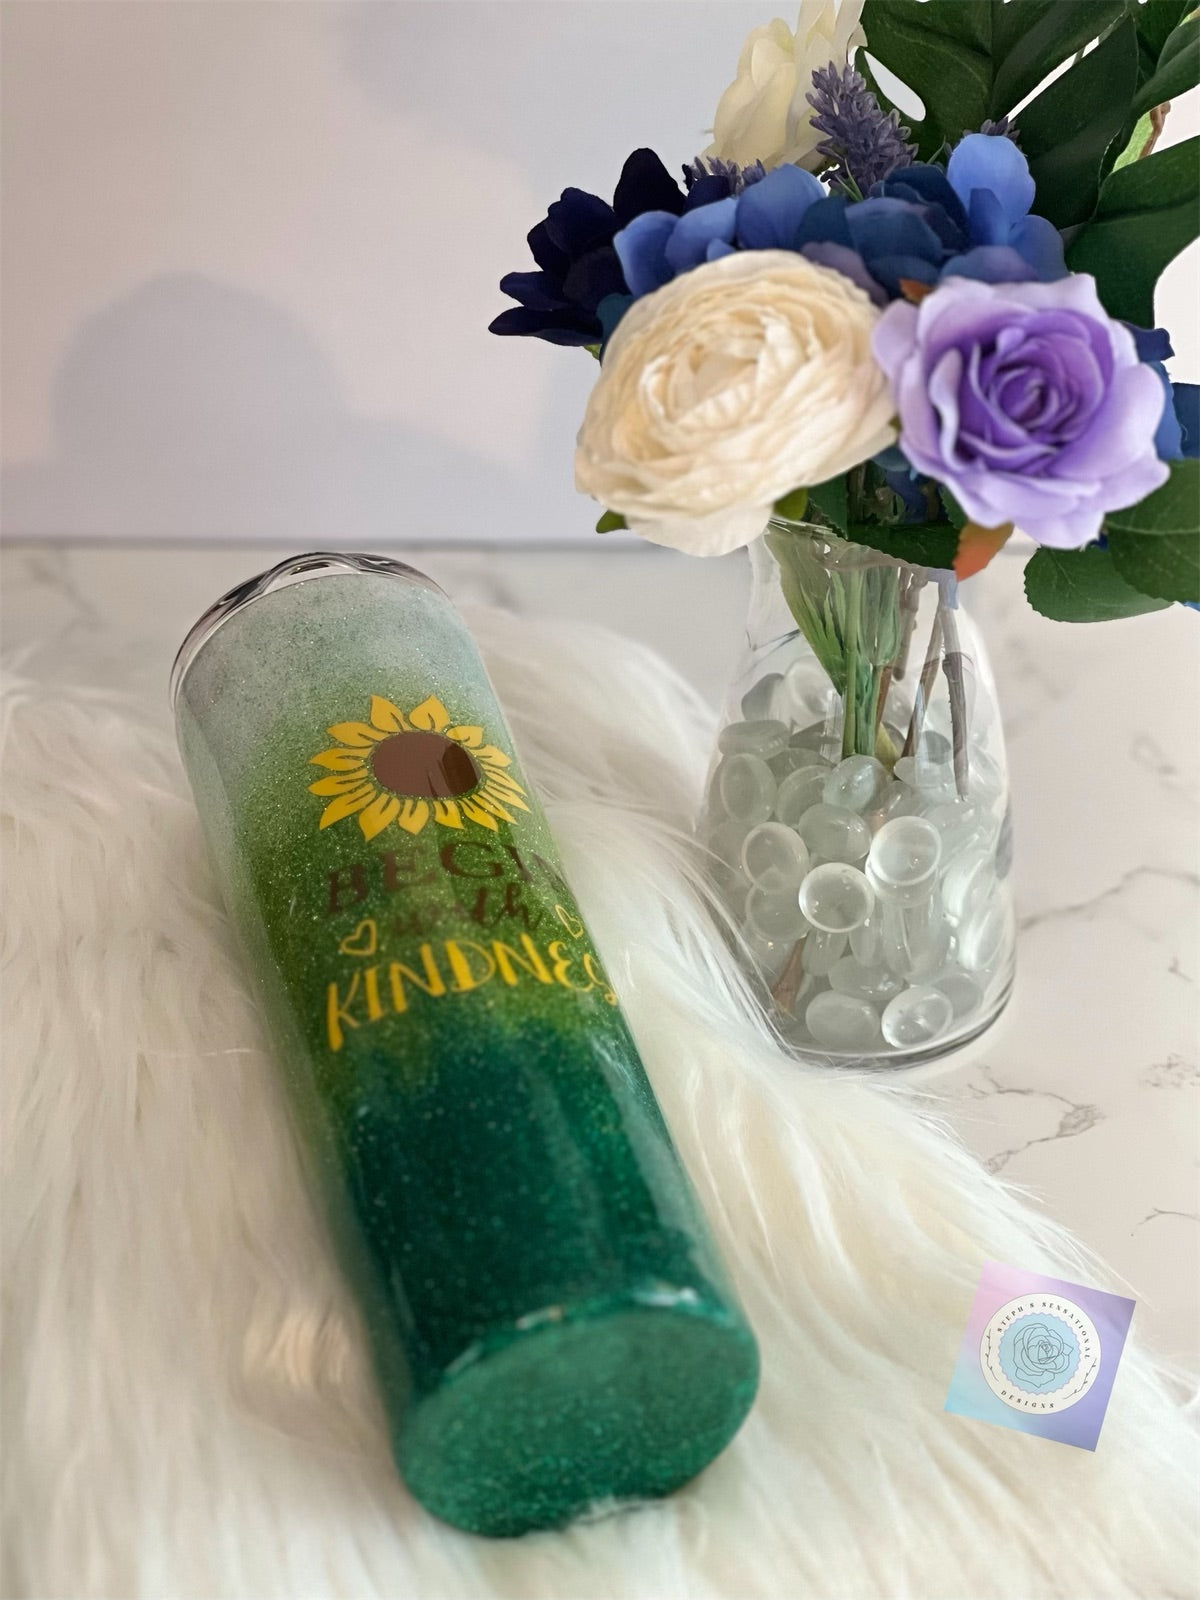 30 oz Straight Skinny "Begin with Kindness" Tumbler